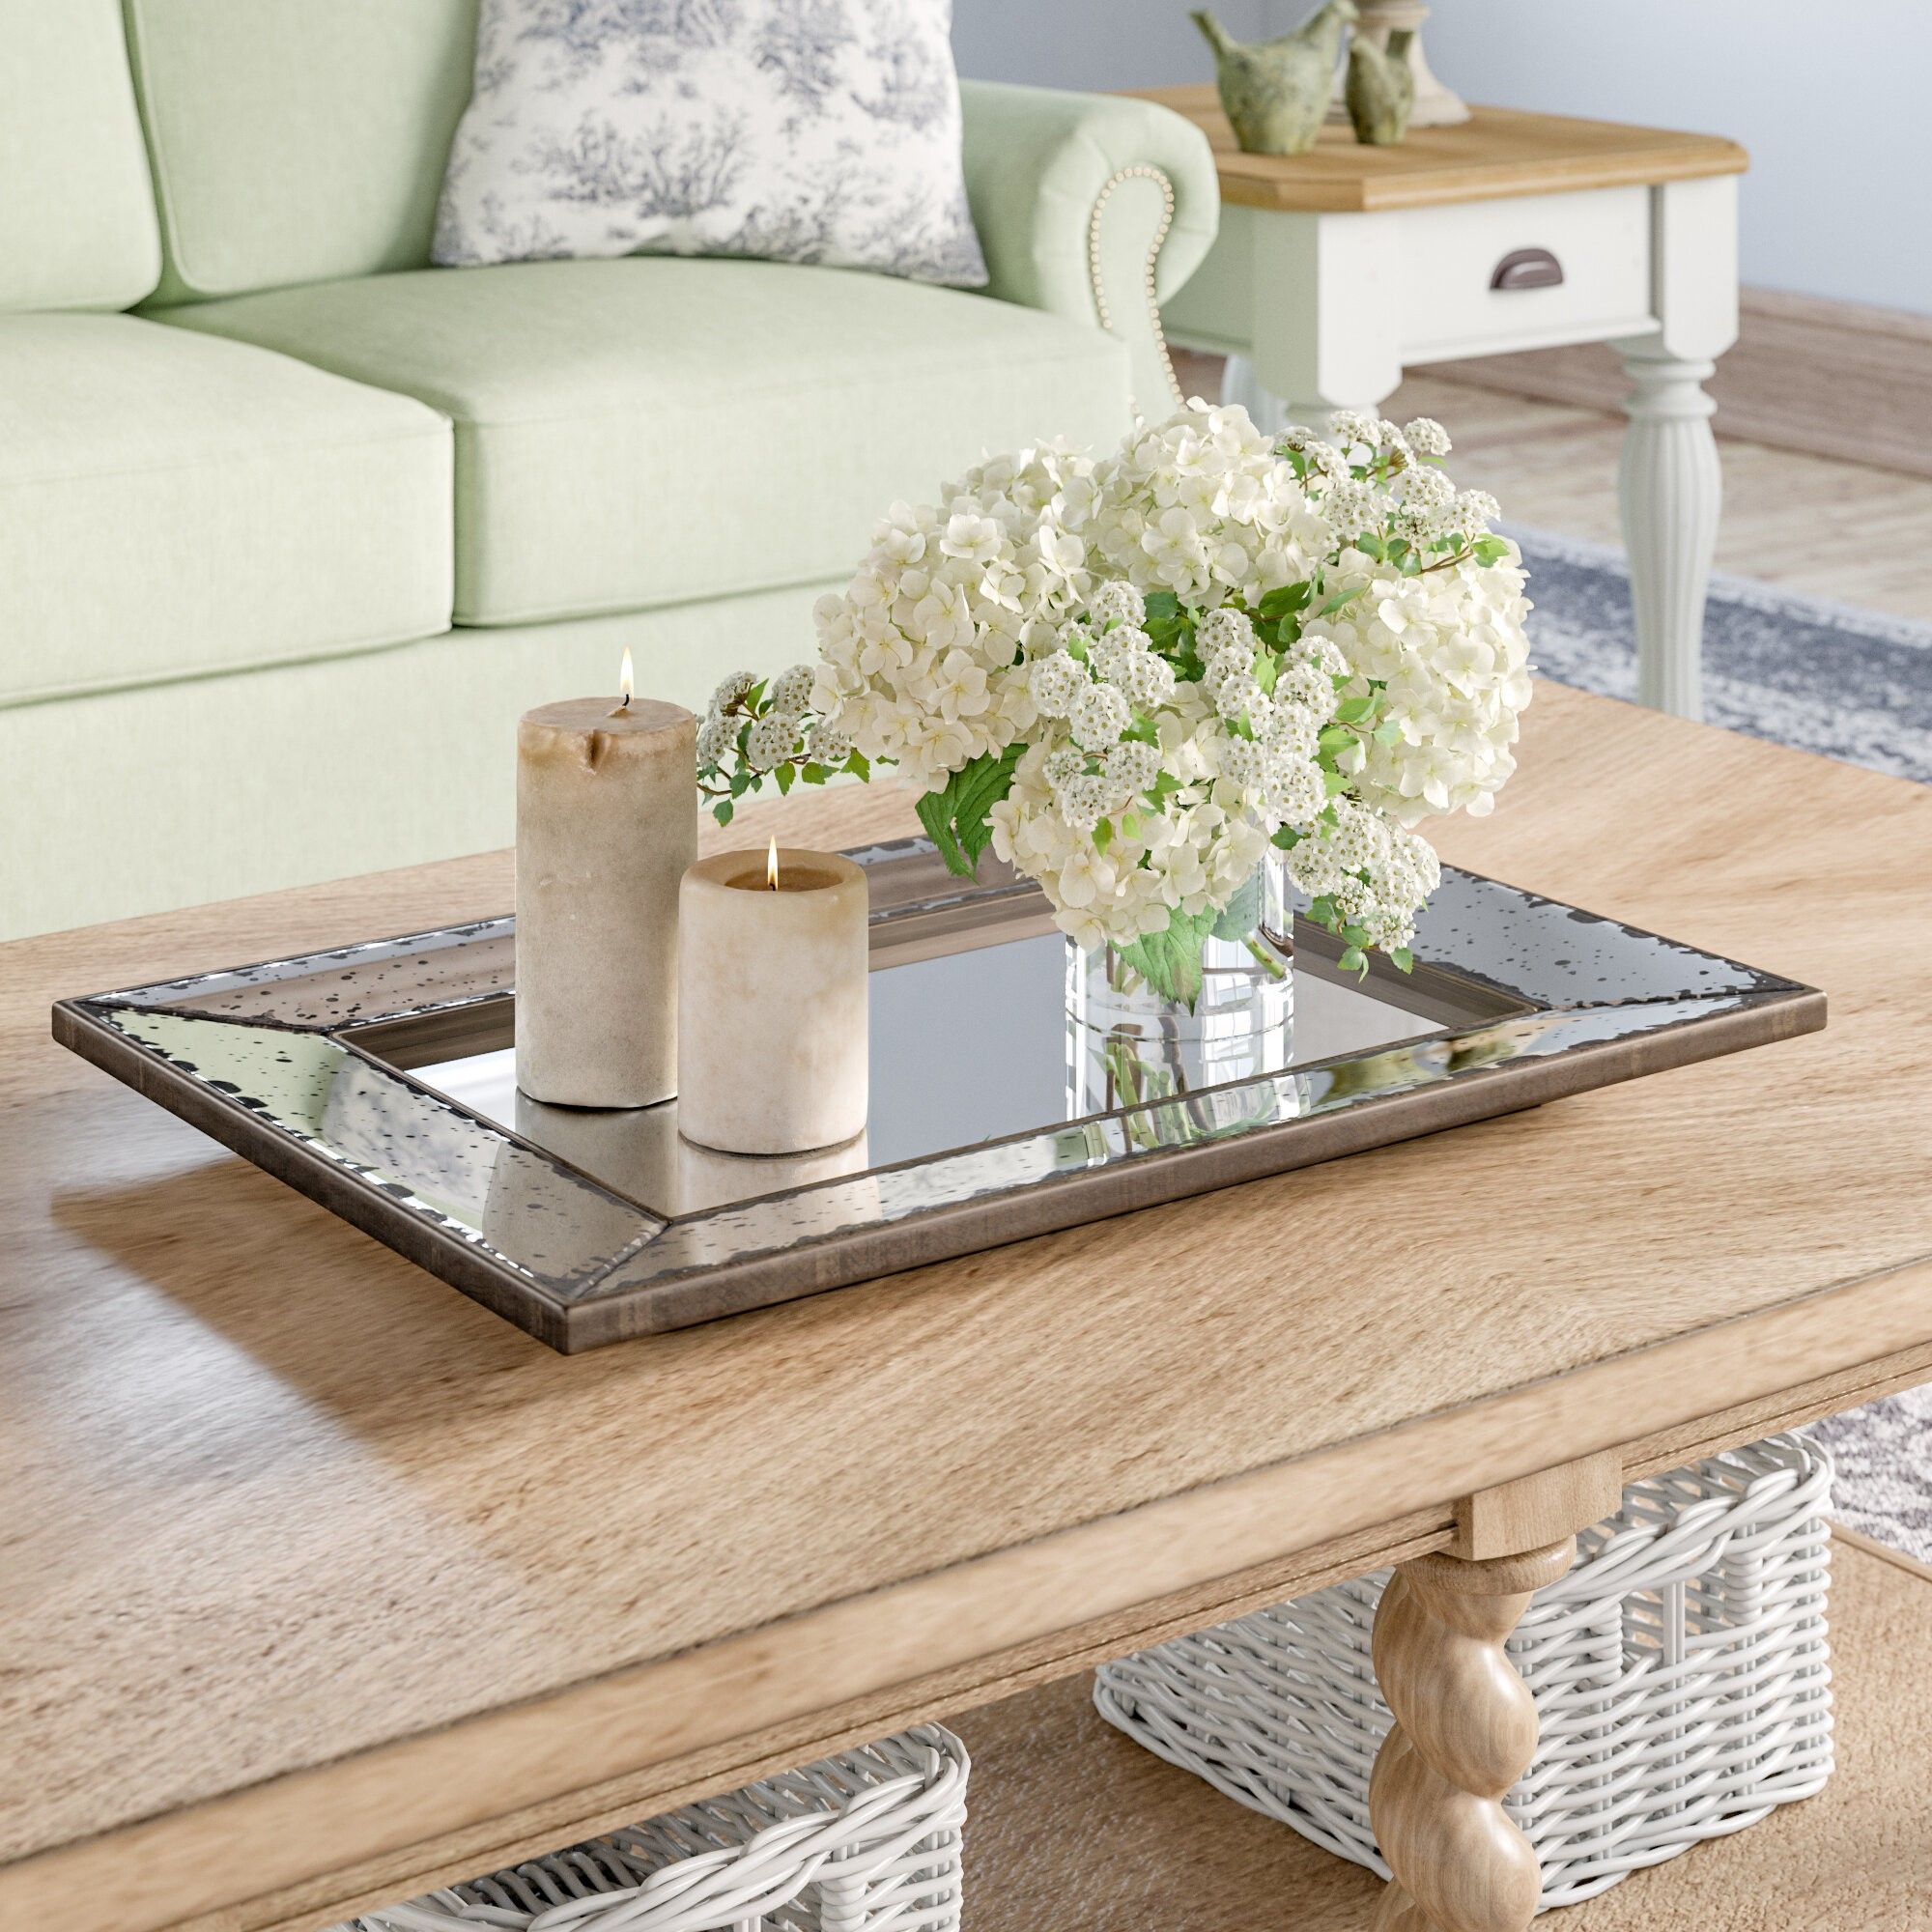 10 Best Decorative Trays For 2021 – Ideas On Foter With Regard To Coffee Tables With Trays (Gallery 18 of 20)